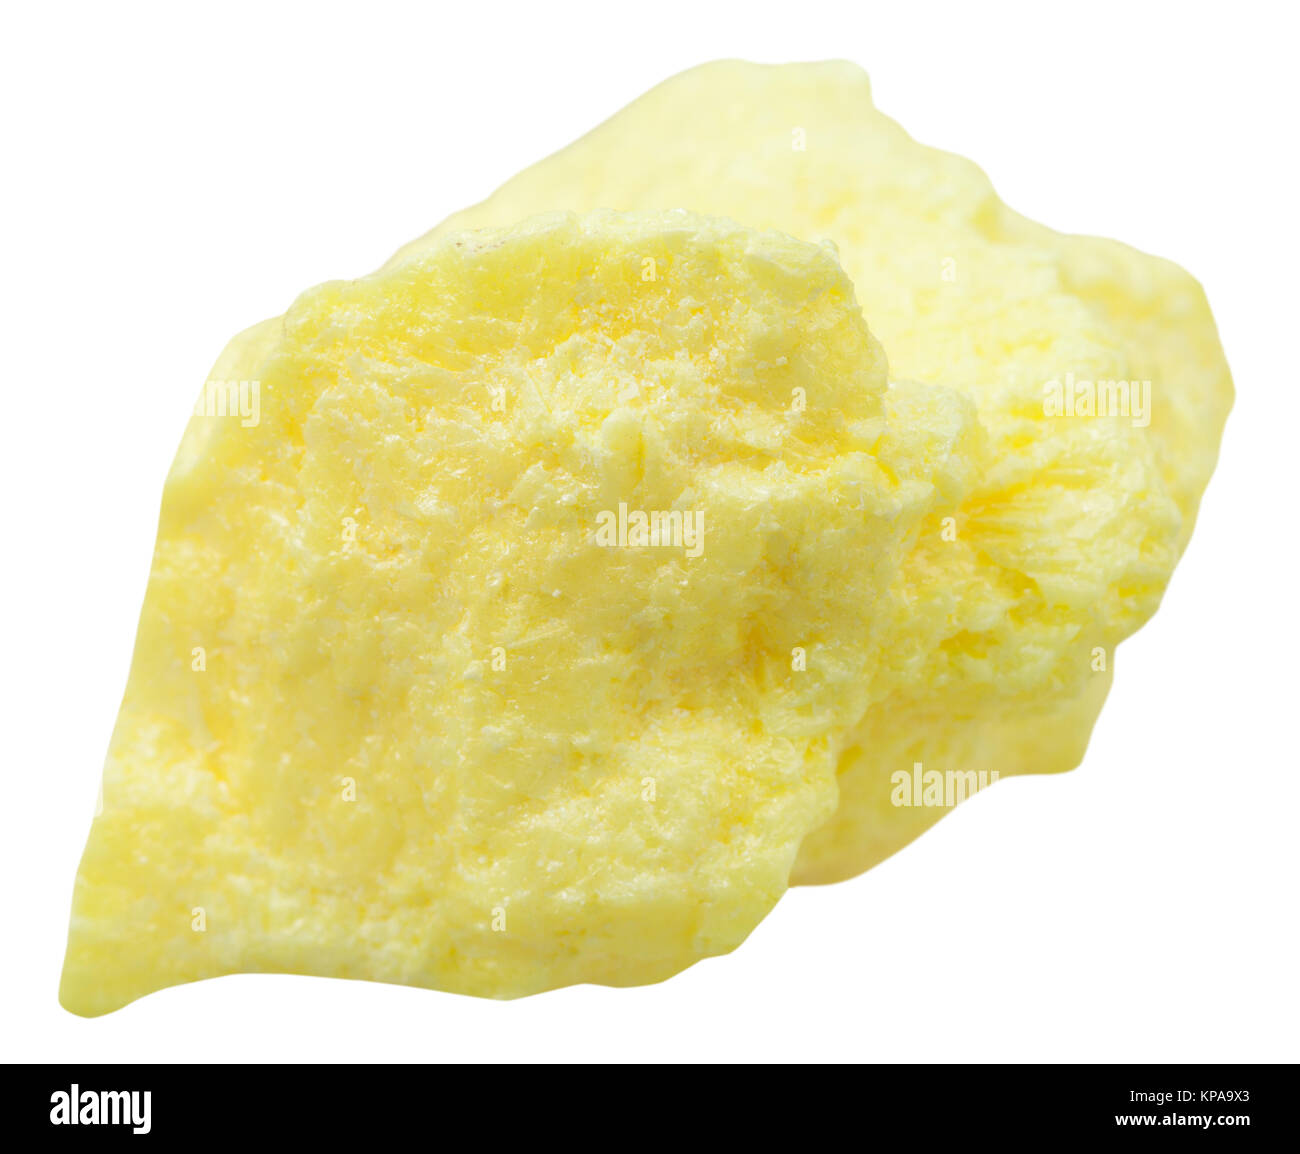 native sulfur mineral stone isolated on white Stock Photo